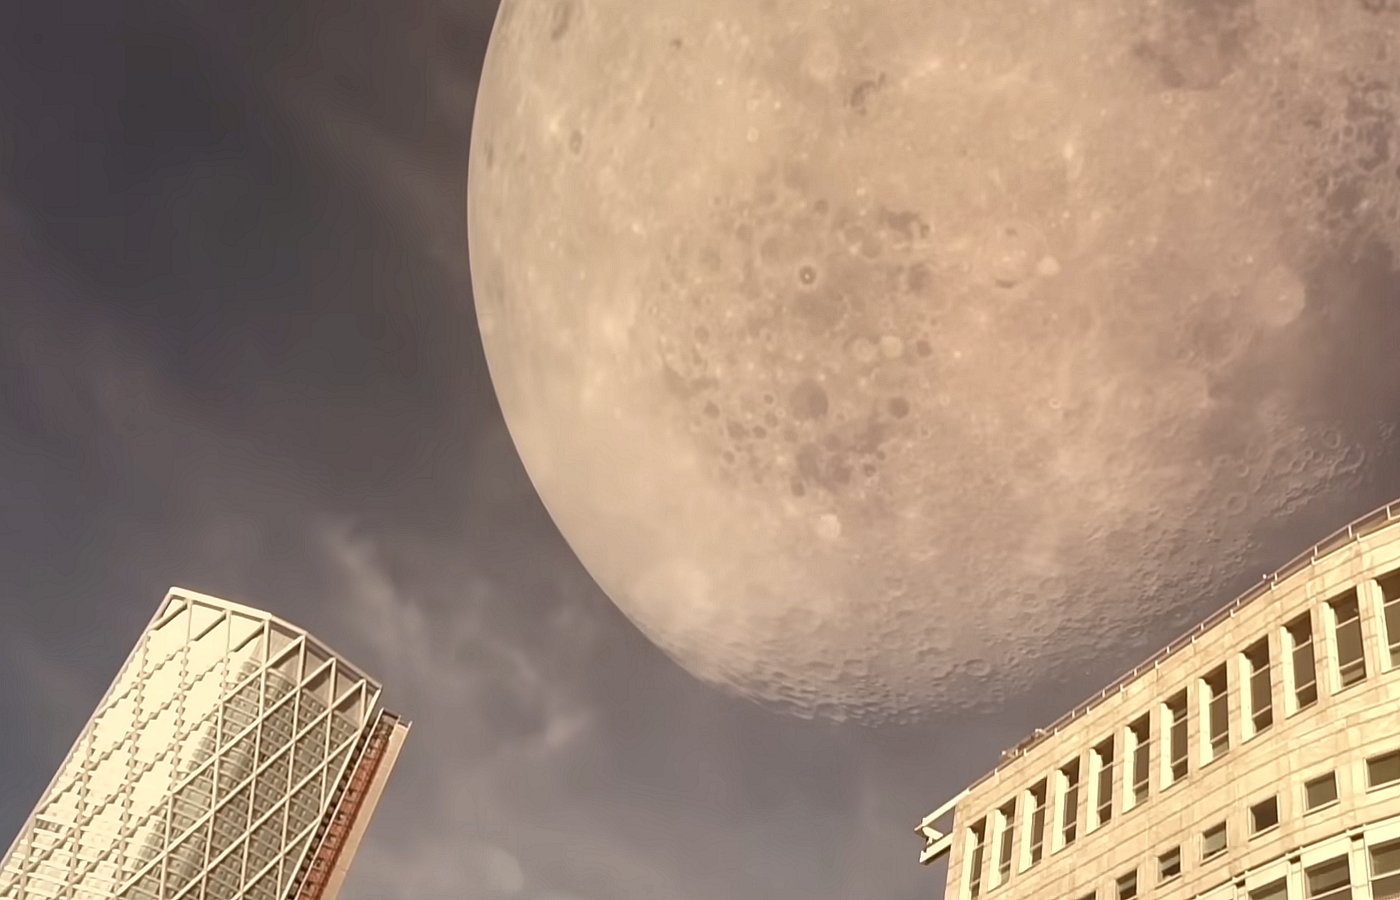 The Moon's movement towards Earth would cause a series of extinction-causing catastrophes, and an amazing simulation was created, but in the end we would still see a beautiful sight.